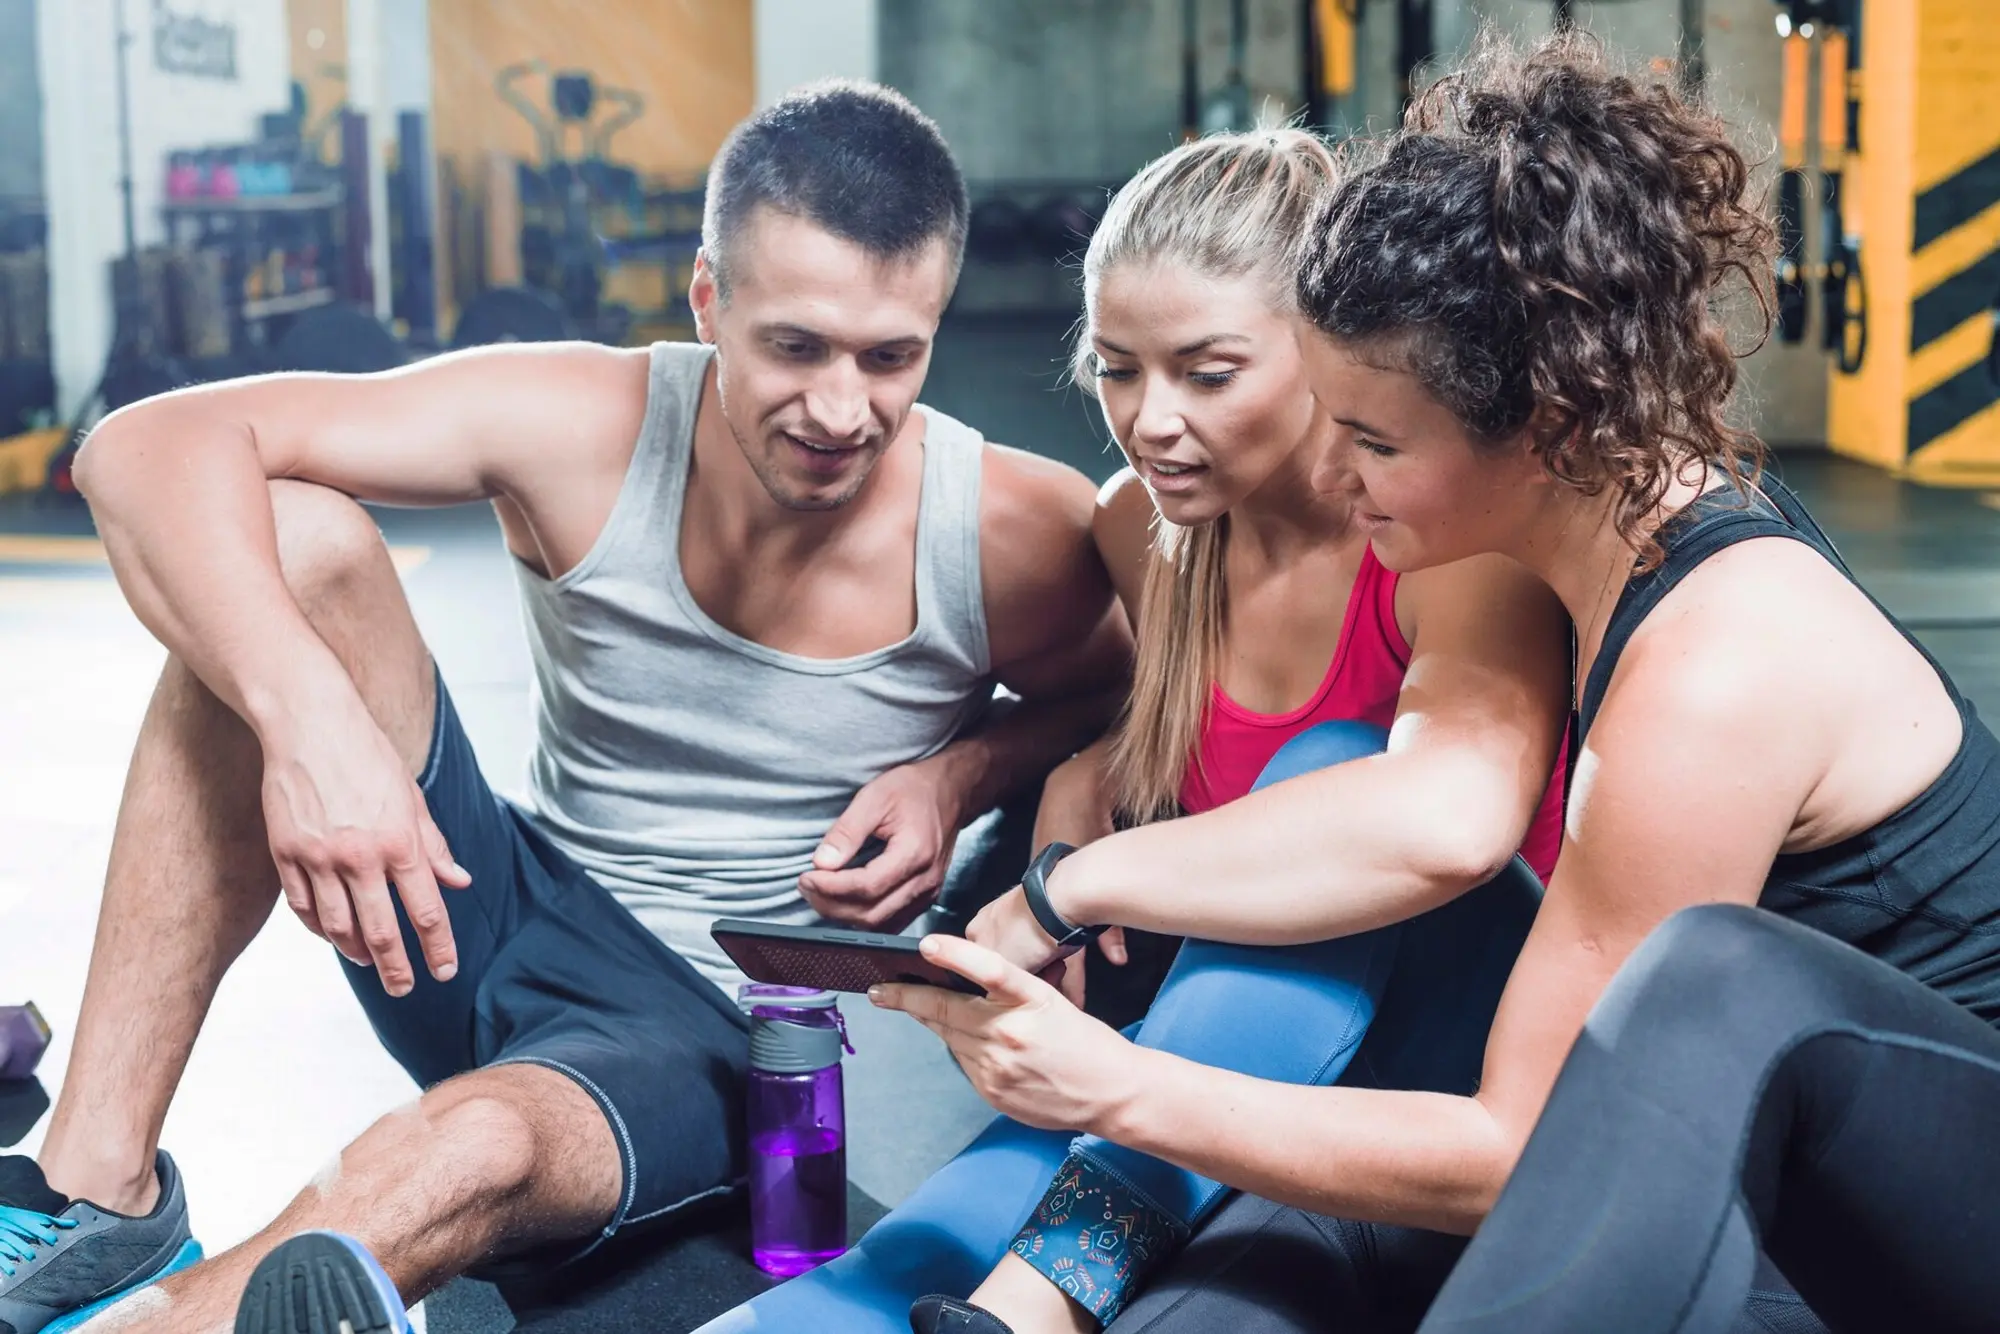 How to engage users in fitness/wellness apps